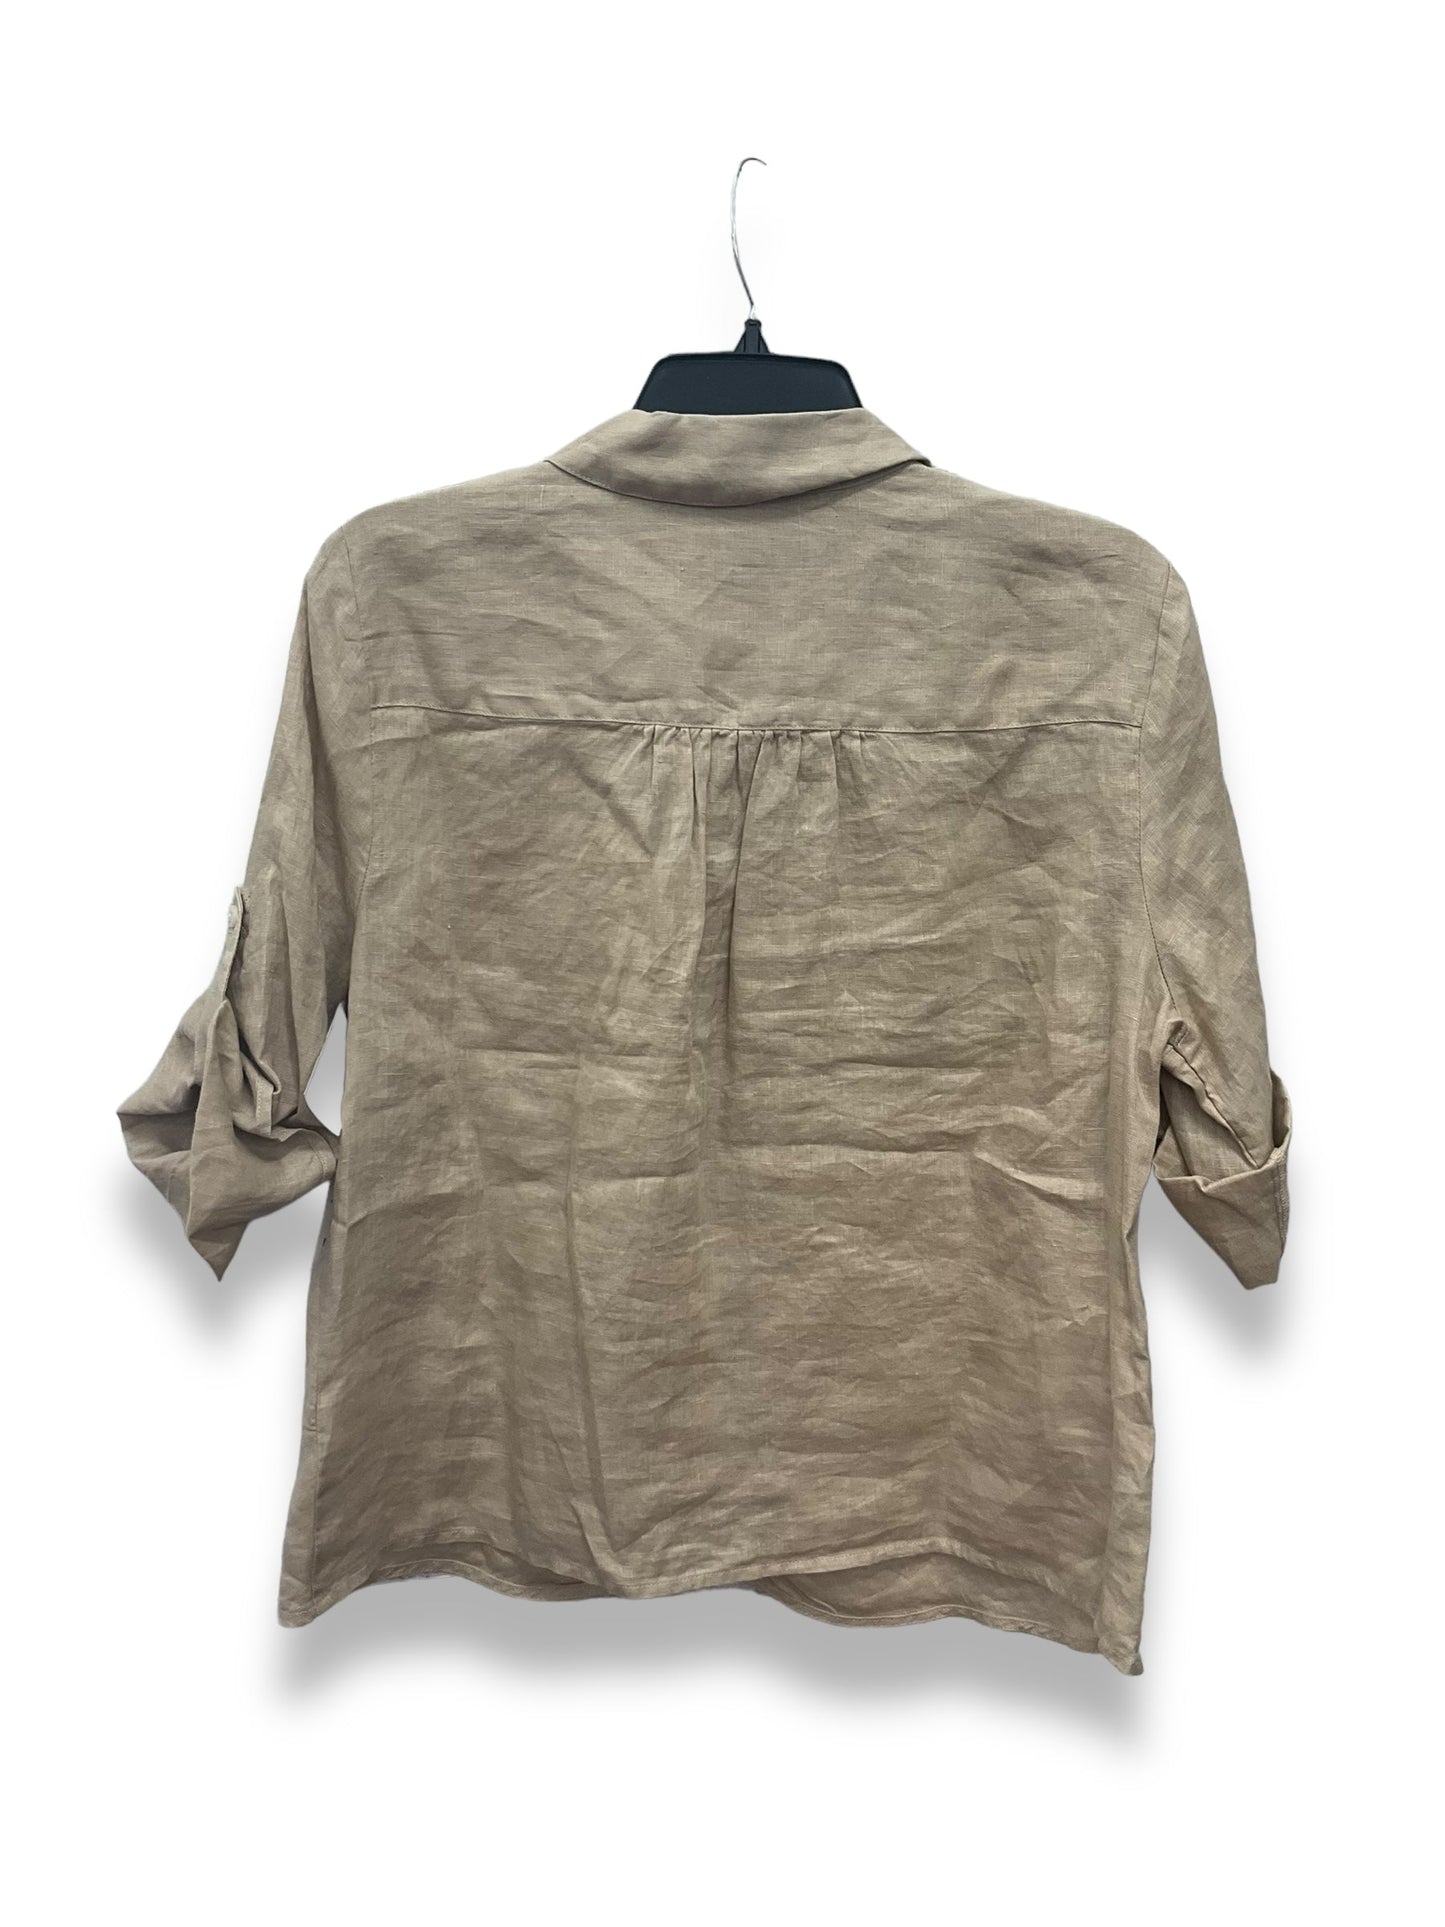 Brown Top 3/4 Sleeve Inc, Size L